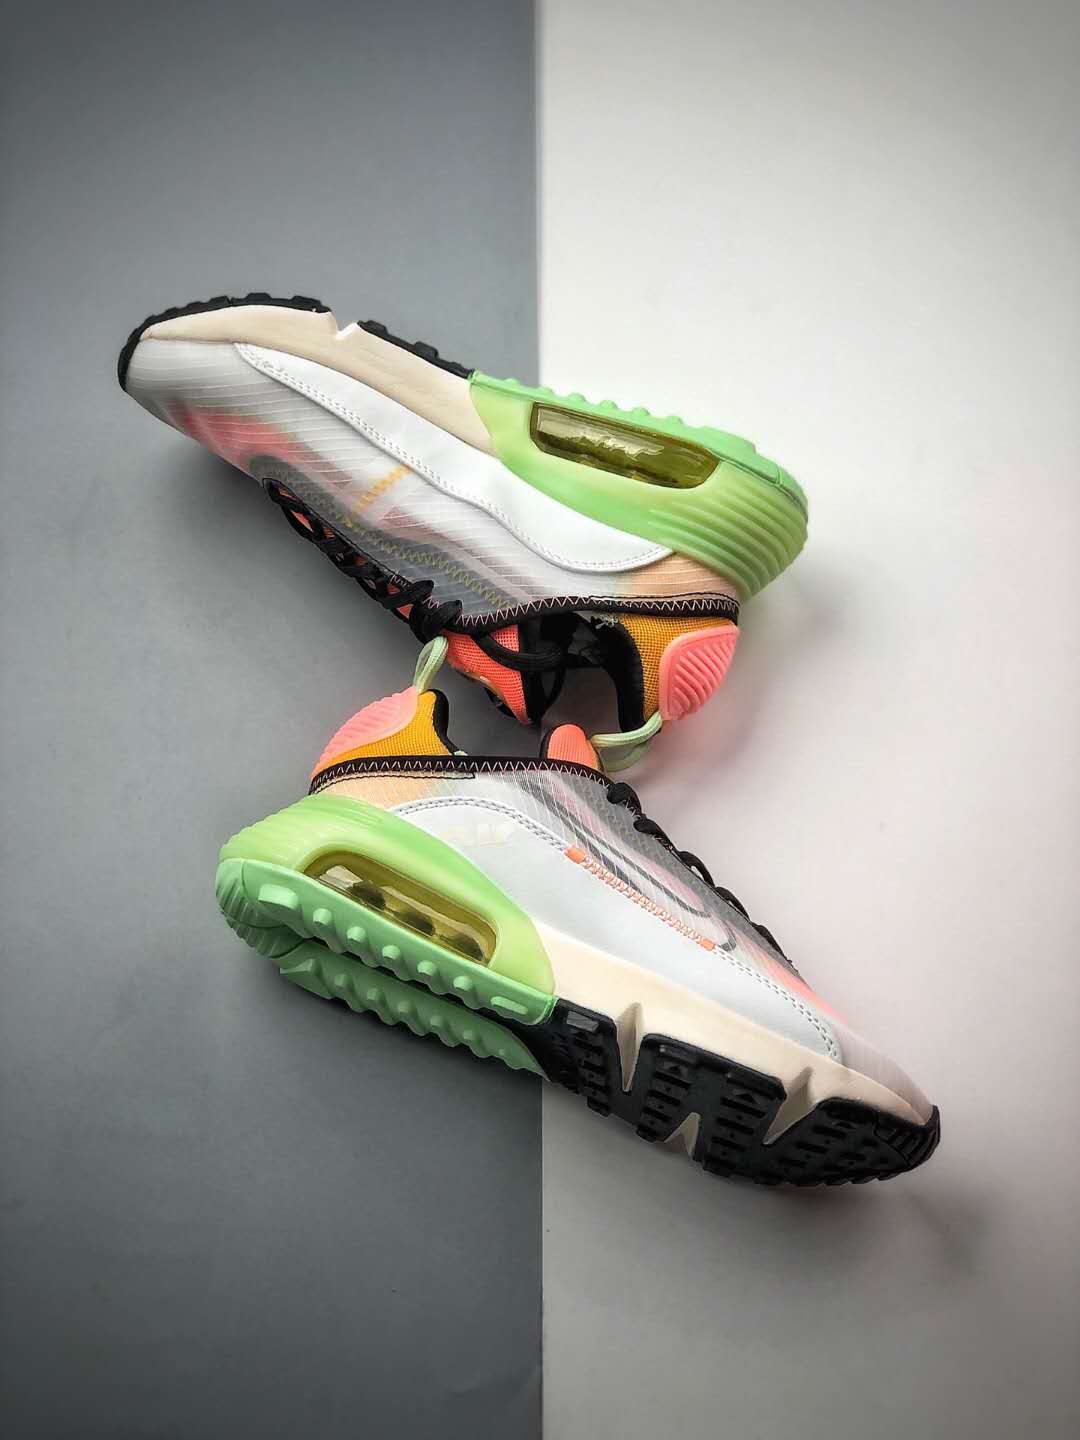 Nike Air Max 2090 'Vapor Green Pink' CZ3867-100 - Shop Latest Release Today!